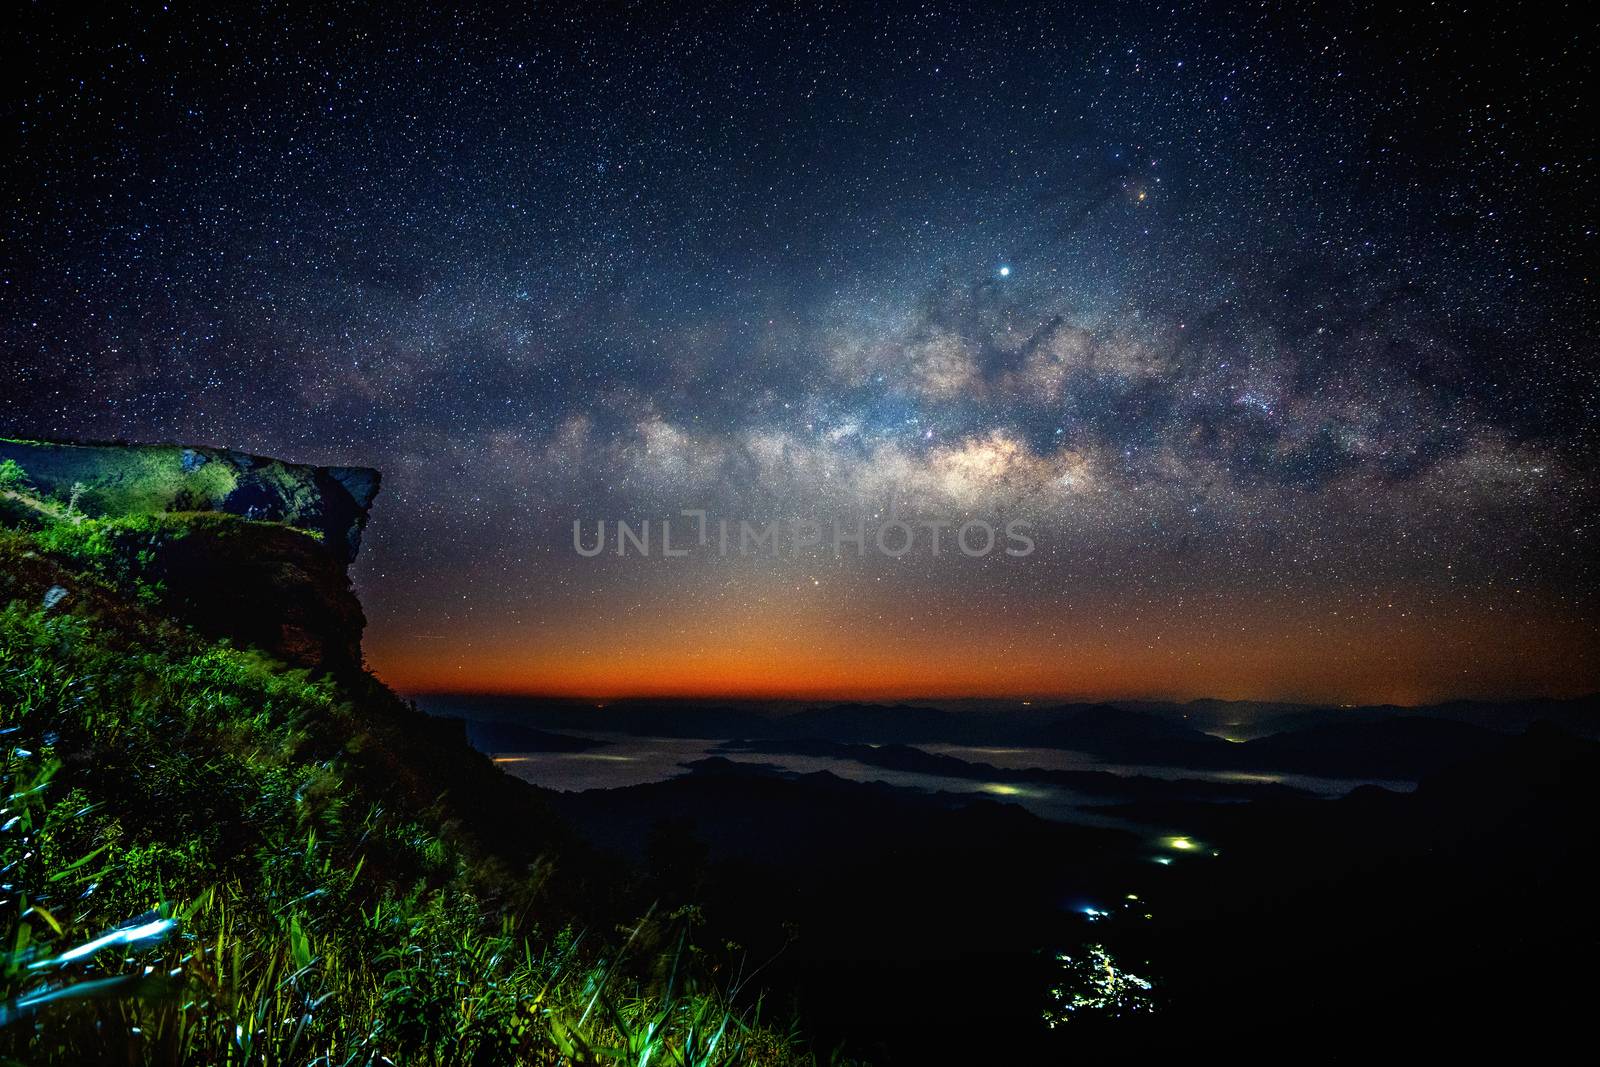 Milky way and star over Phu chi fa at night in Chiangrai, Thailand.